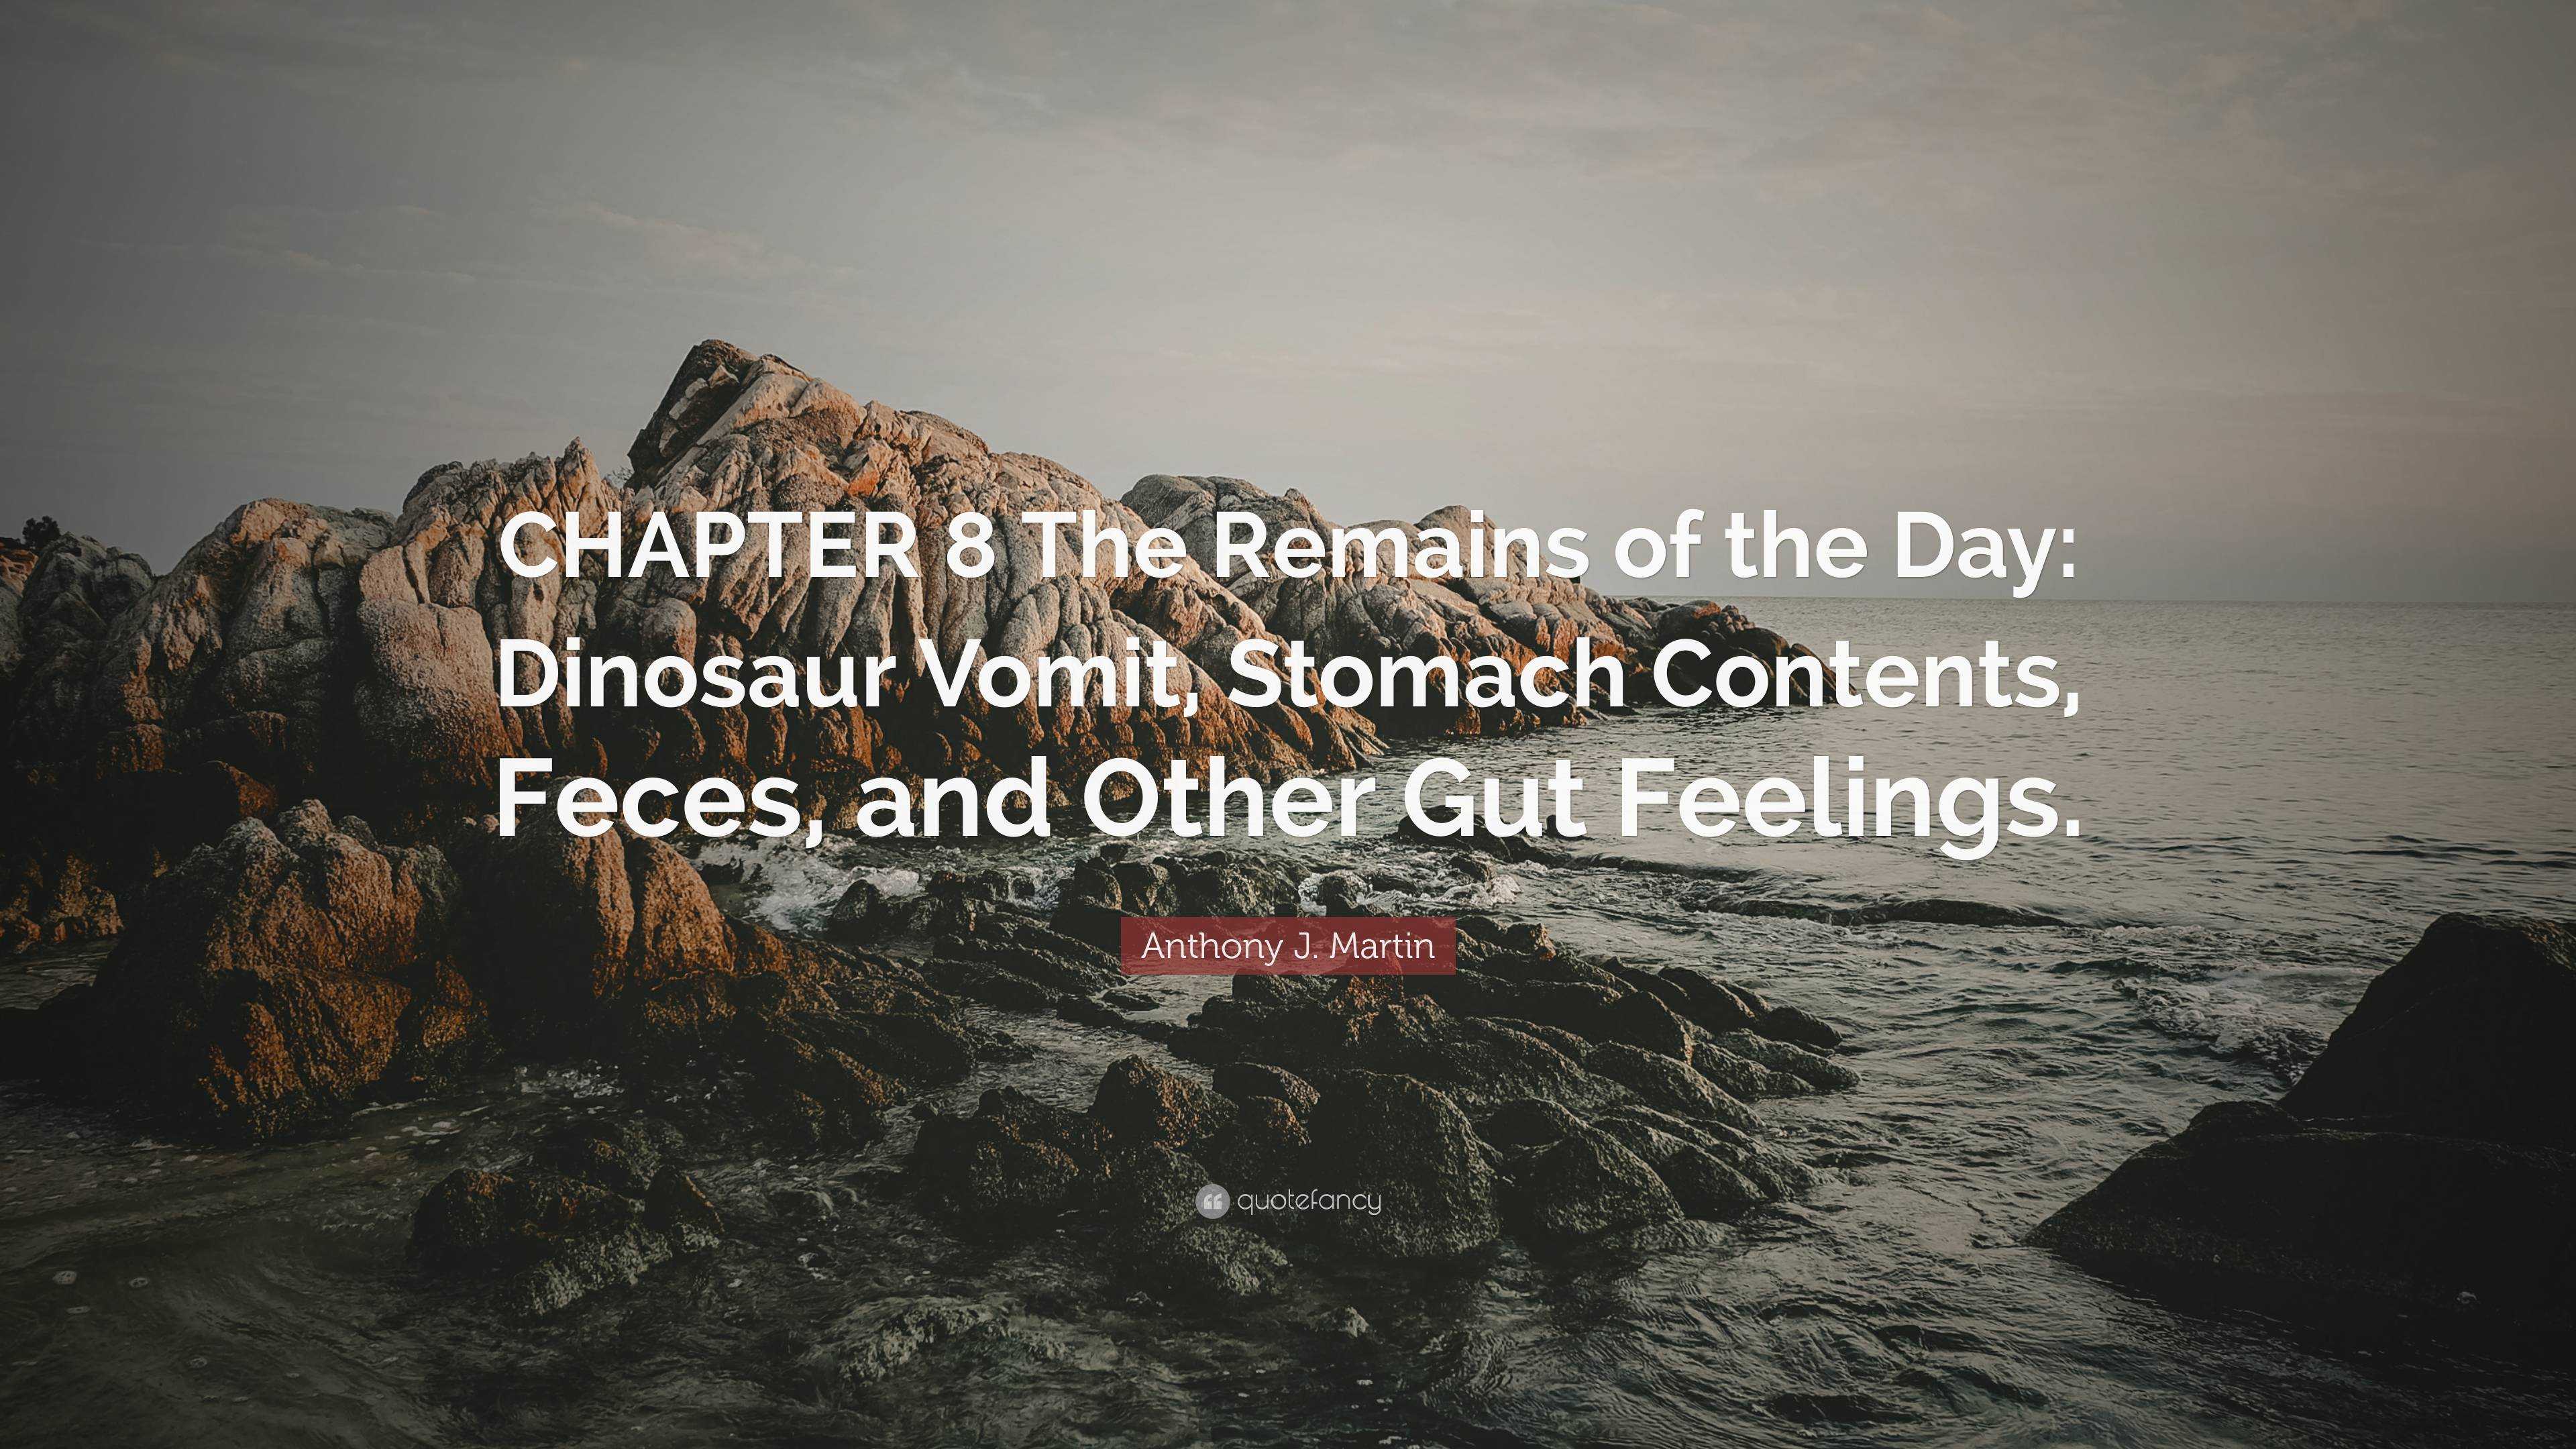 Anthony J Martin Quote Chapter 8 The Remains Of The Day Dinosaur Vomit Stomach Contents Feces